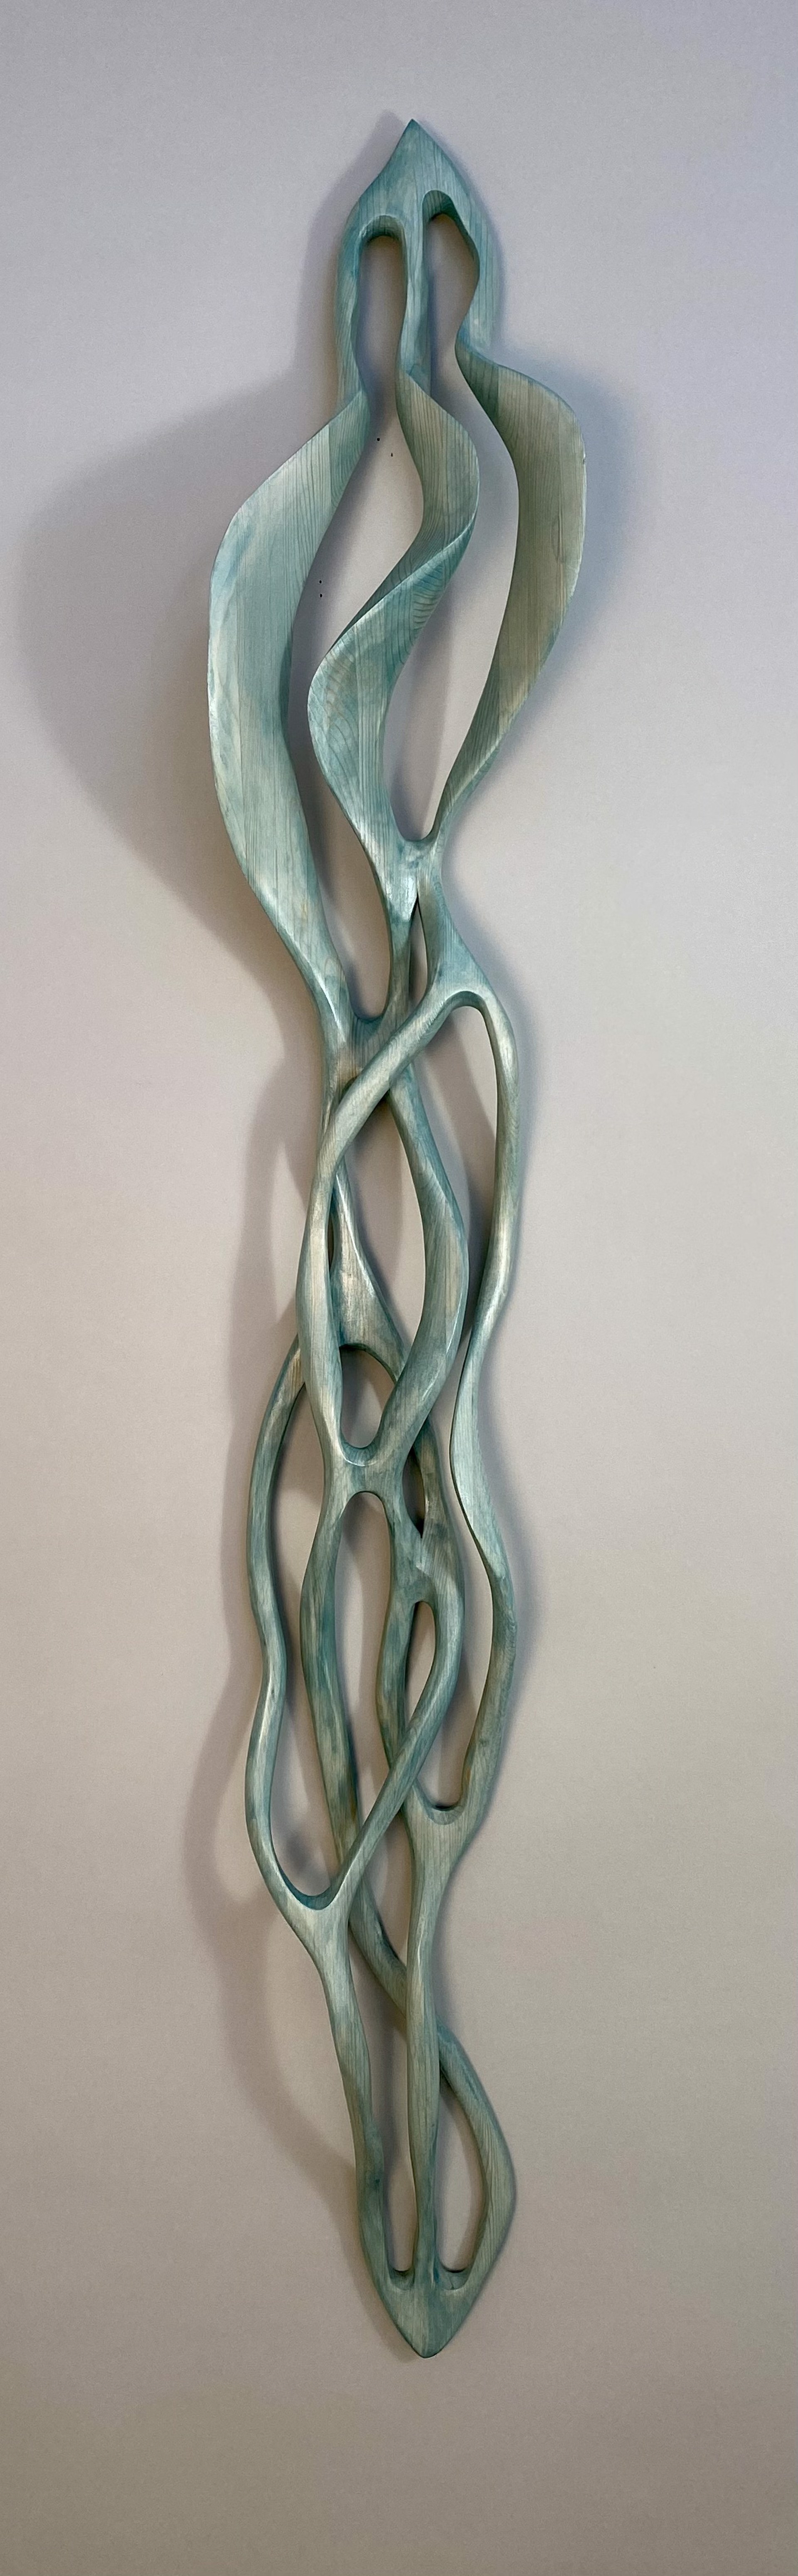 Turquoise Twist III by Caprice Pierucci